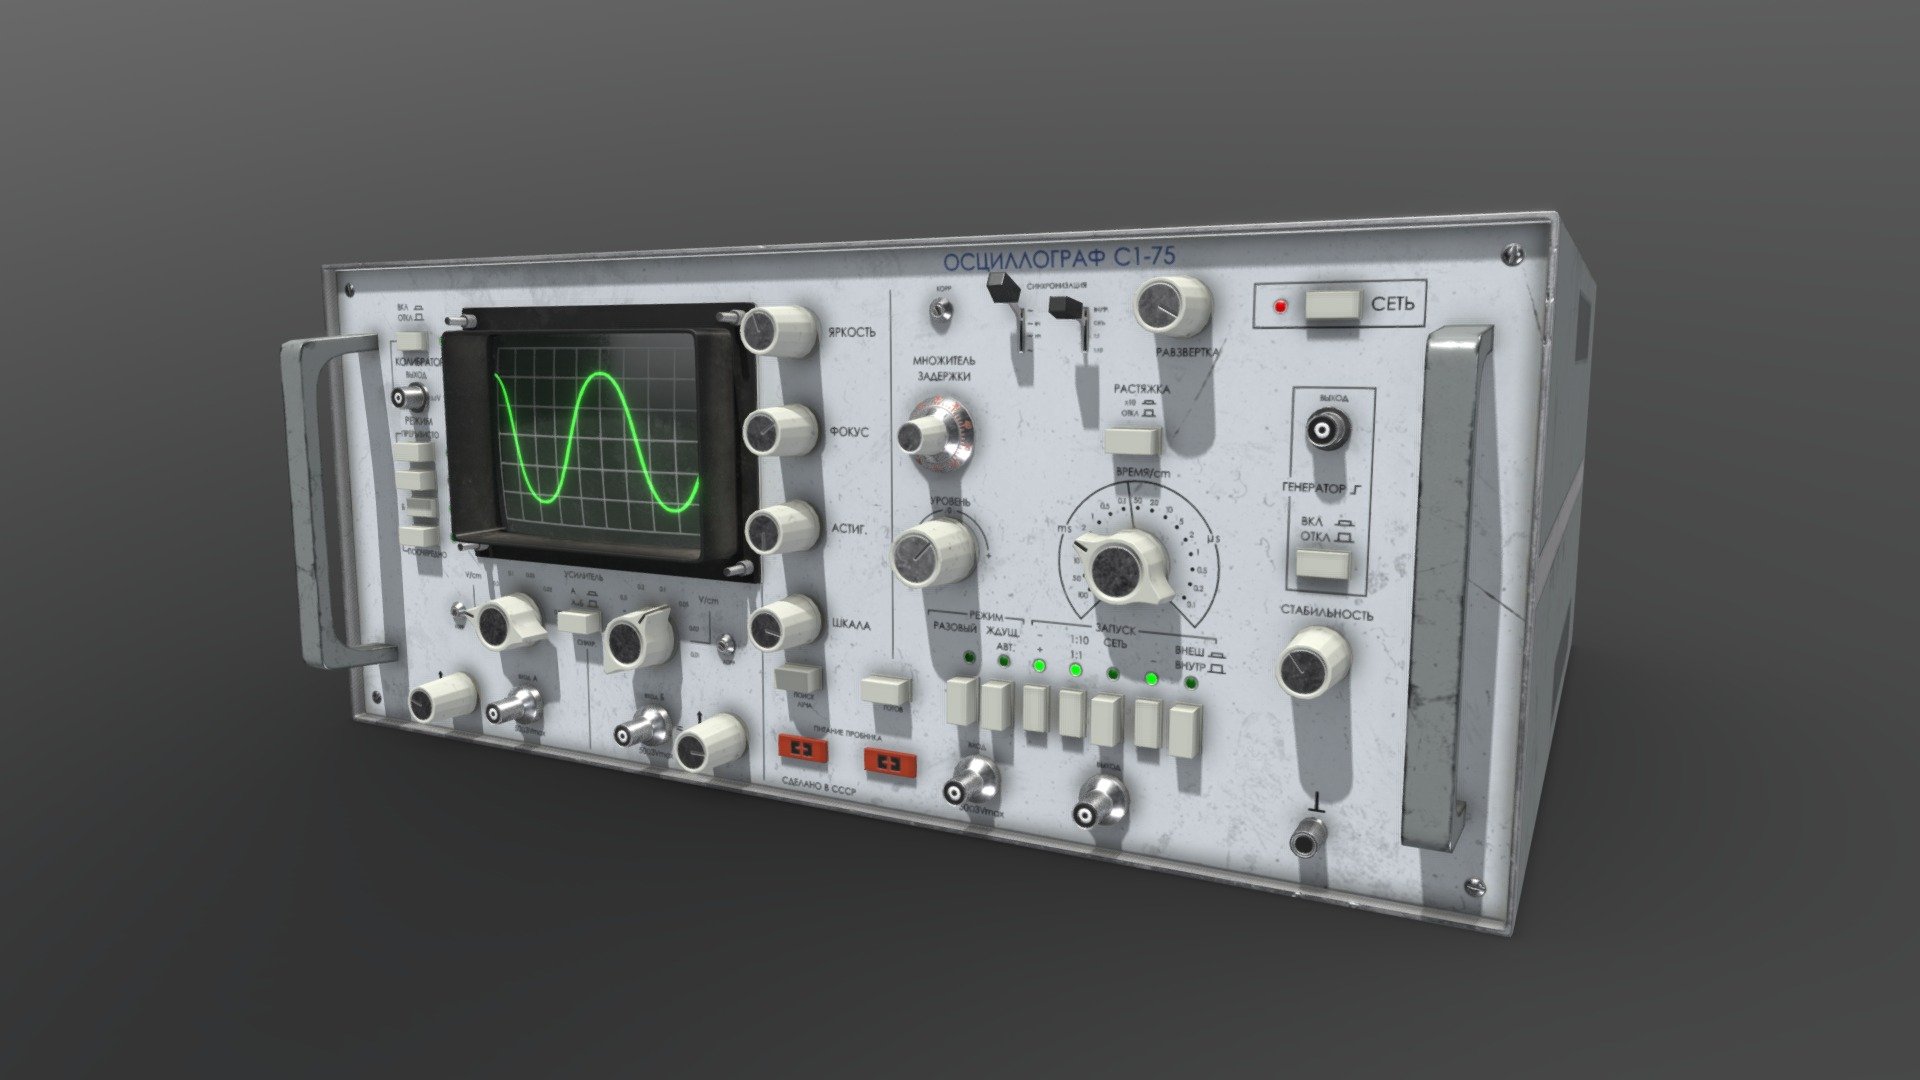 An old soviet oscilloscope C1-75
Some kind of ancient machine of unknown purpose
4k texture
Asset made for INFINITE FEAR game project, Uncable Studios.
Thanks for watching! ) - Oscilloscope C1-75 - 3D model by Kozlov Maksim (@kozlovchik) 3d model